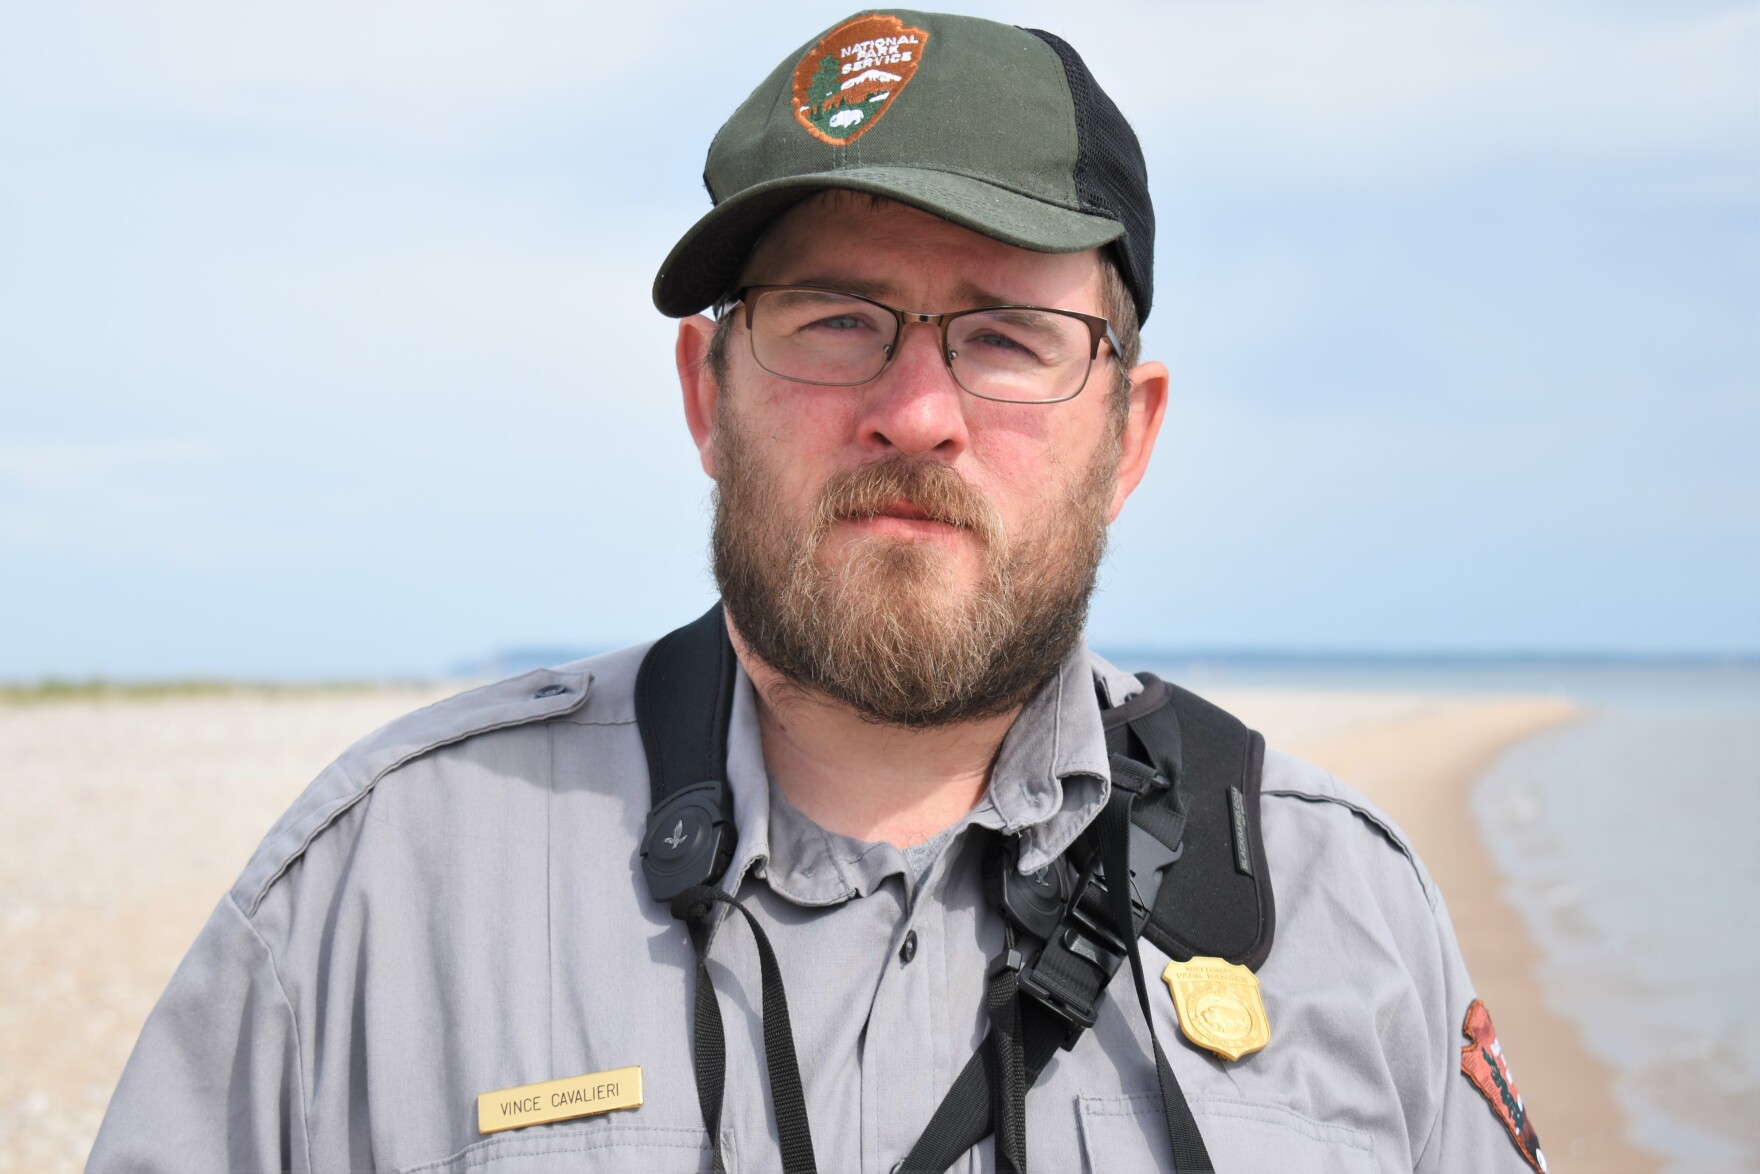 a white man with a beard and glasses wearing a park uniform looks solemnly at the camera